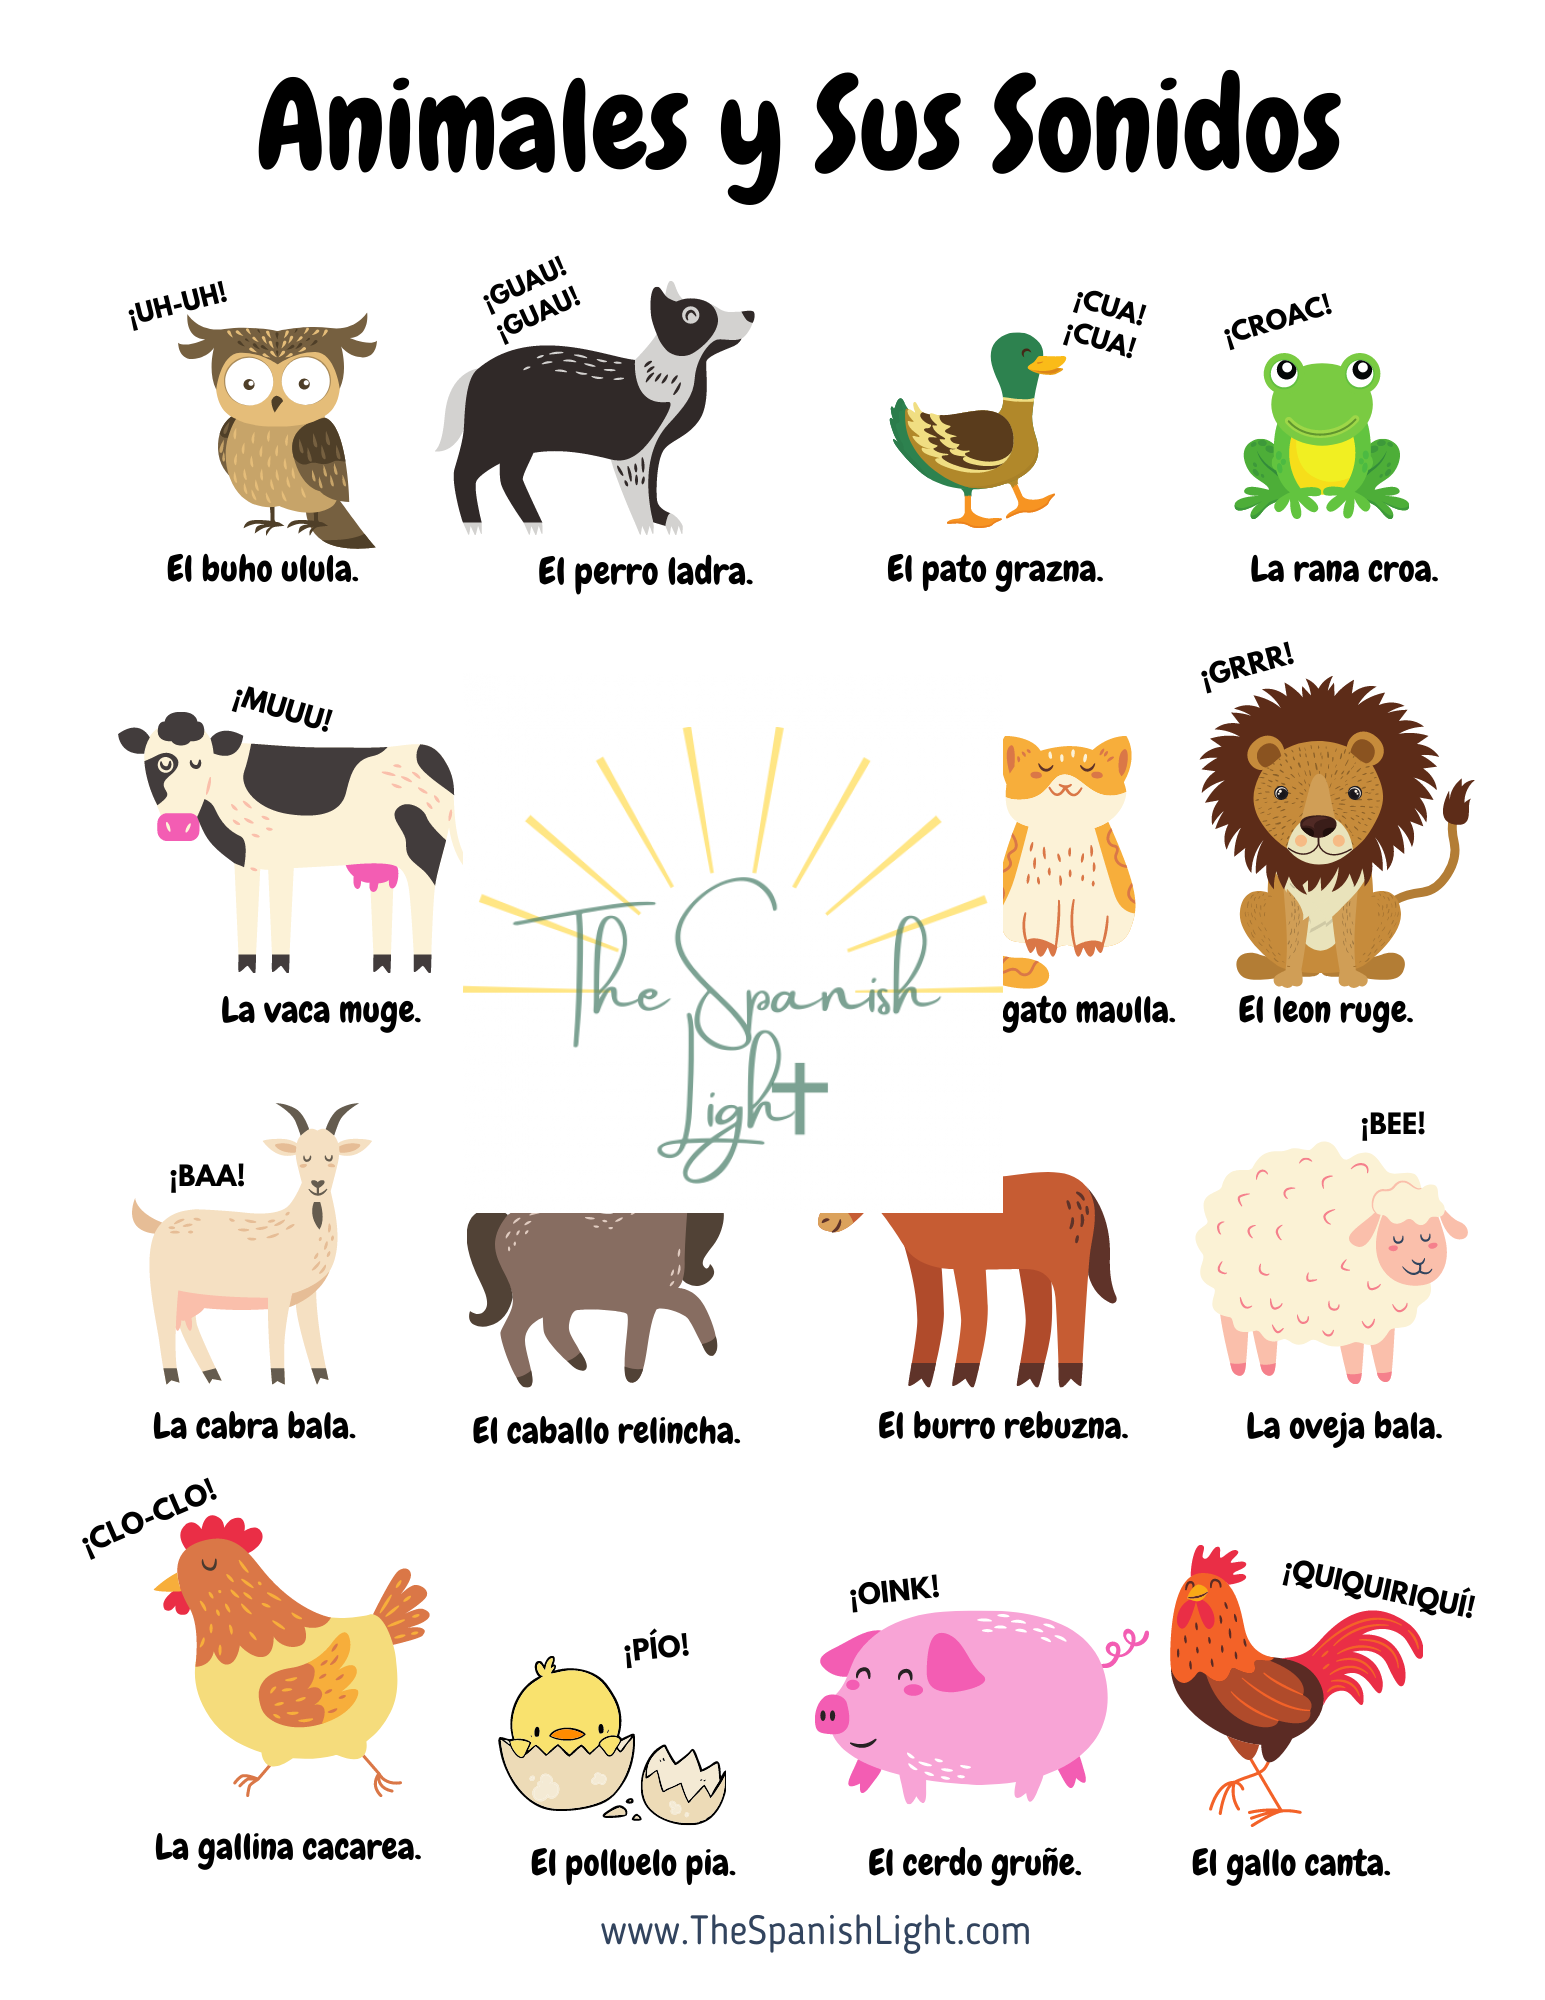 Animals and Their Sounds in Spanish Poster - The Spanish Light